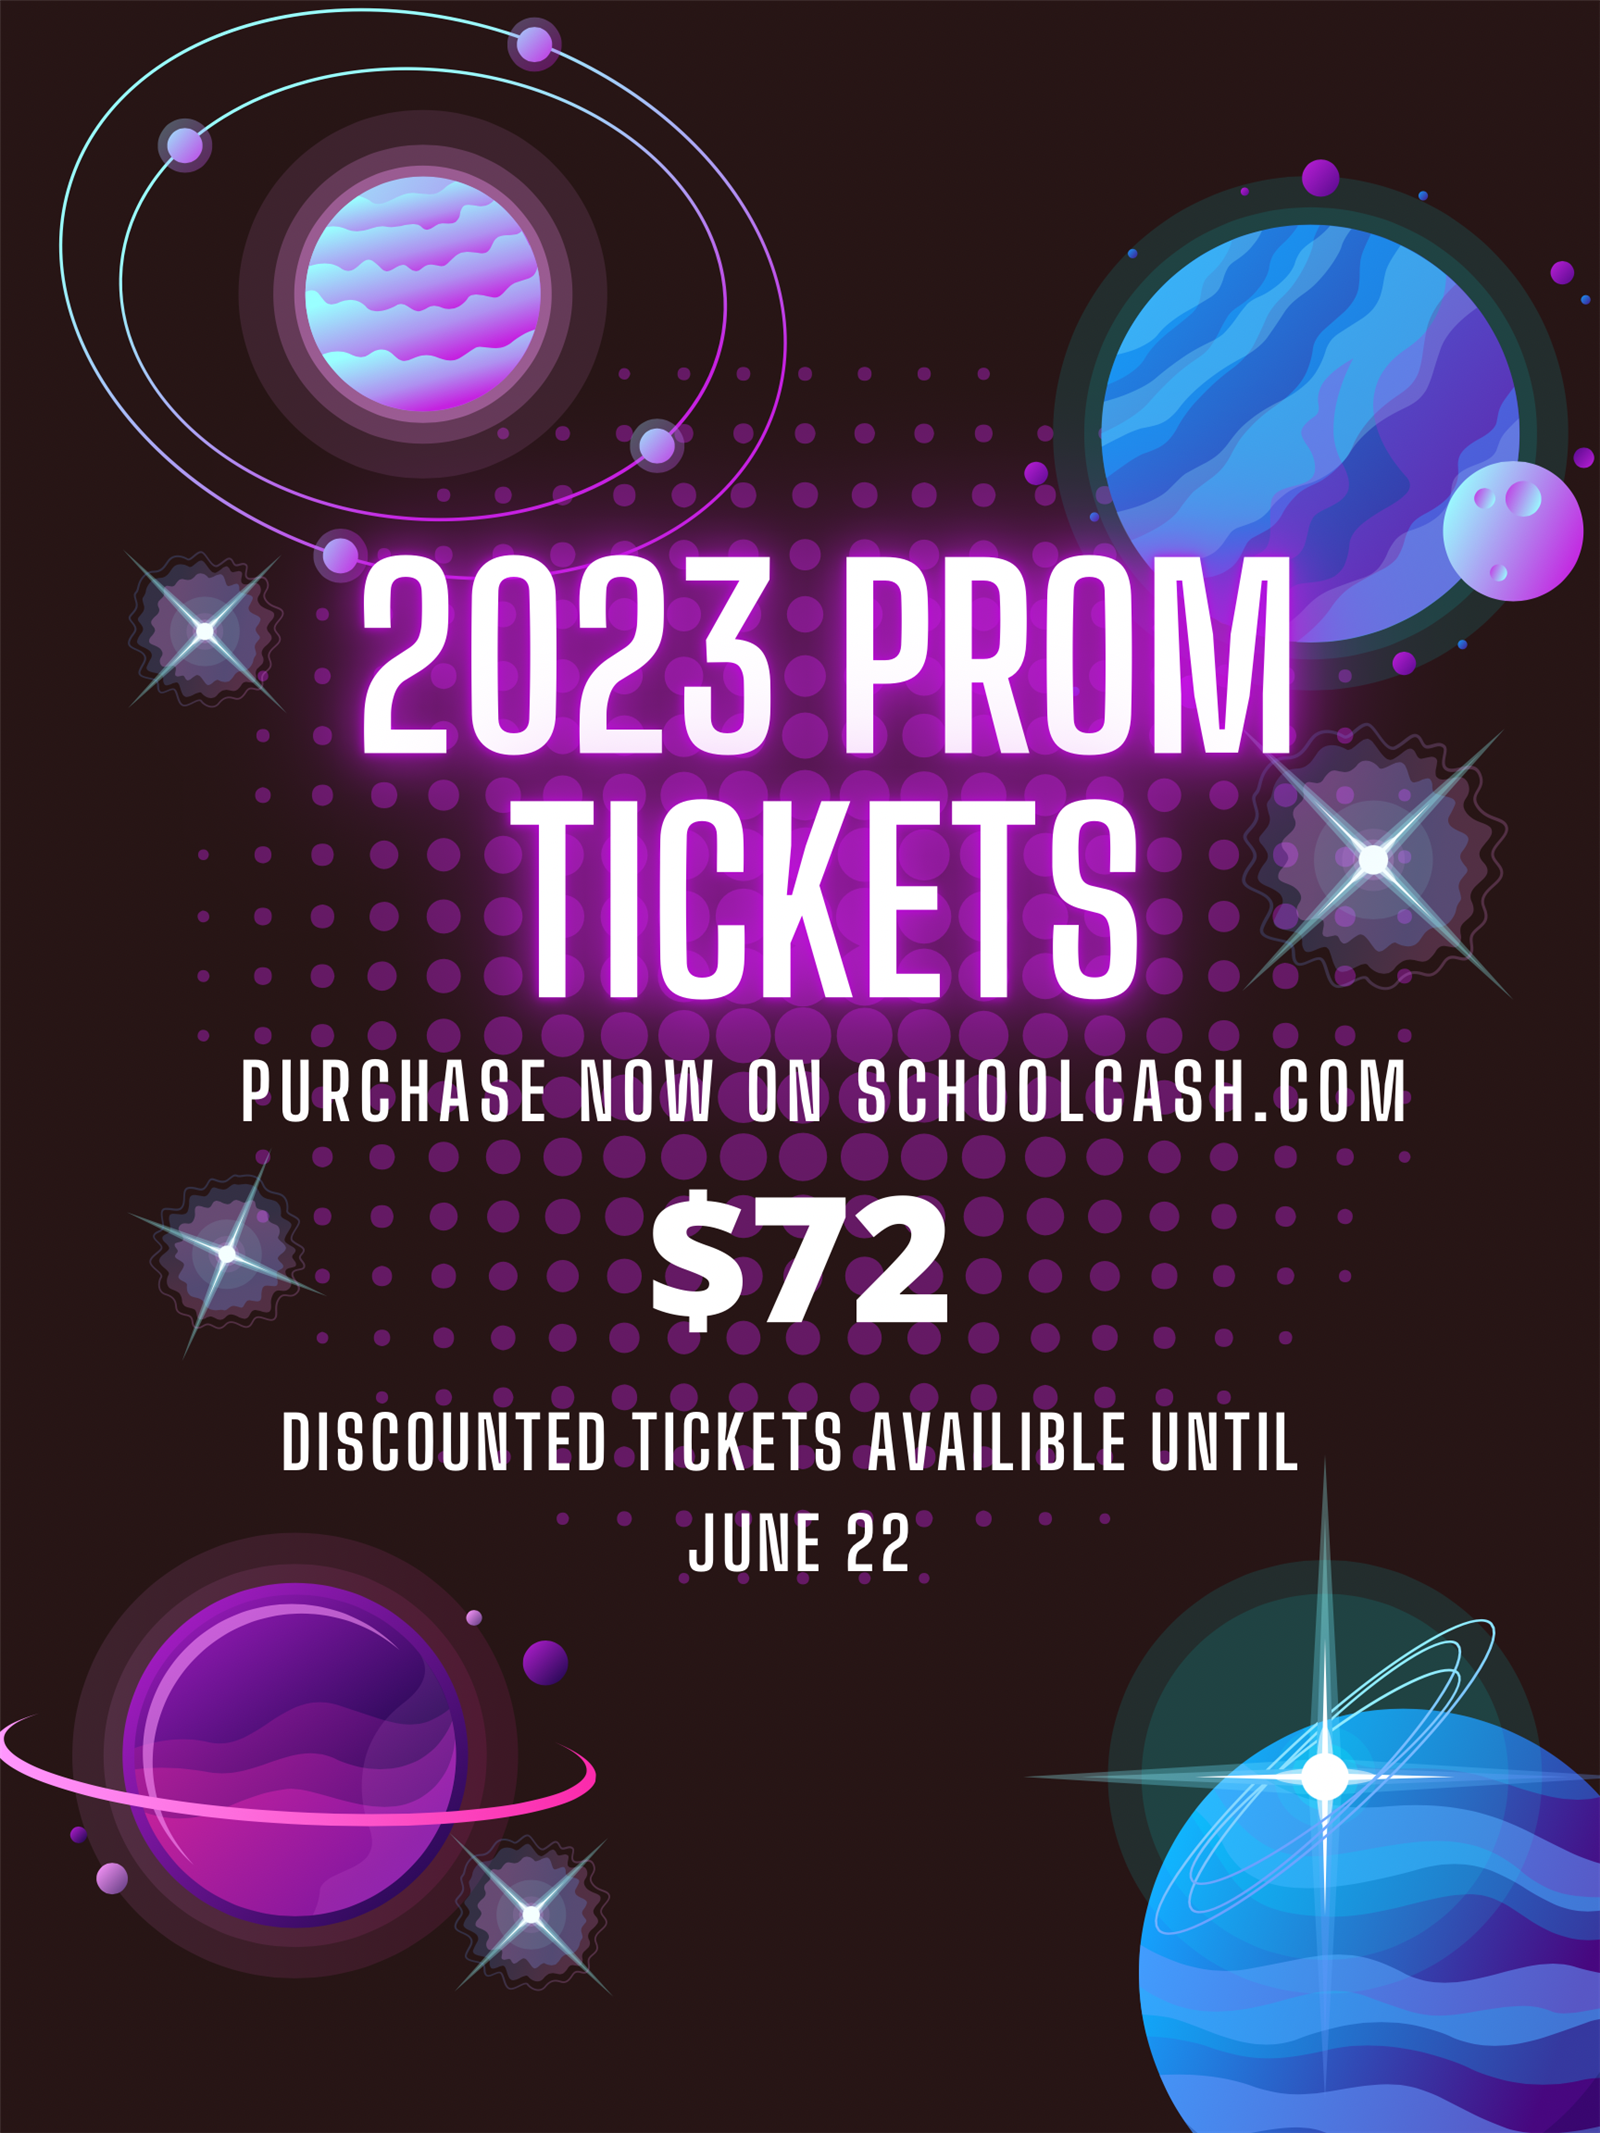 2023 prom tickets - purchase now on Schoolcash.com for $72. Discounted tickets available until June 2022